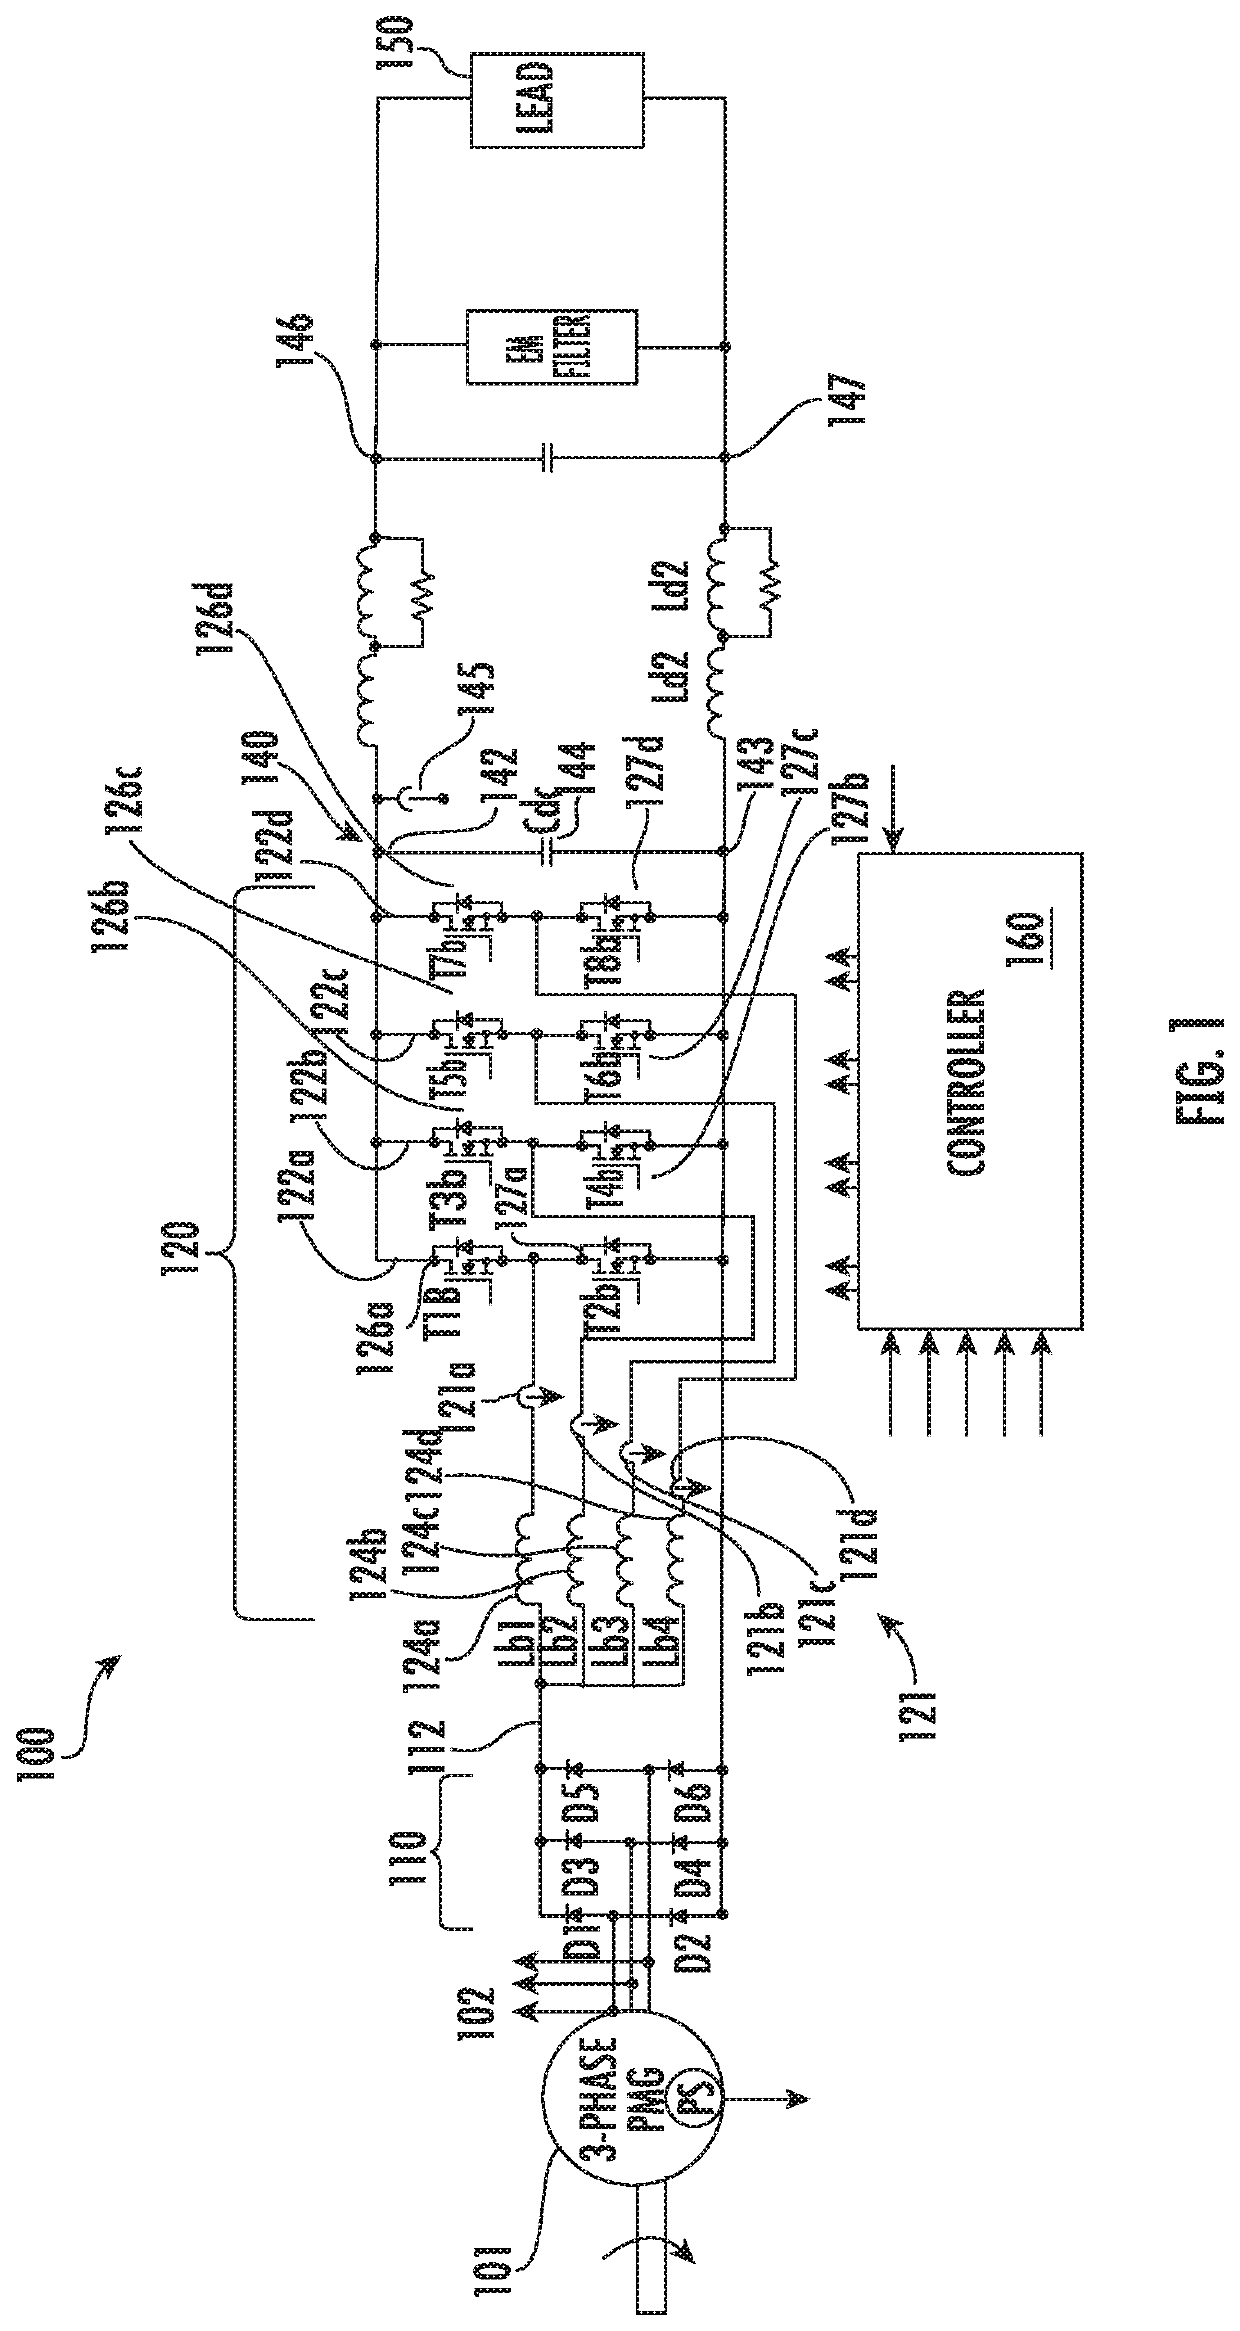 DC power generating system with voltage ripple compensation